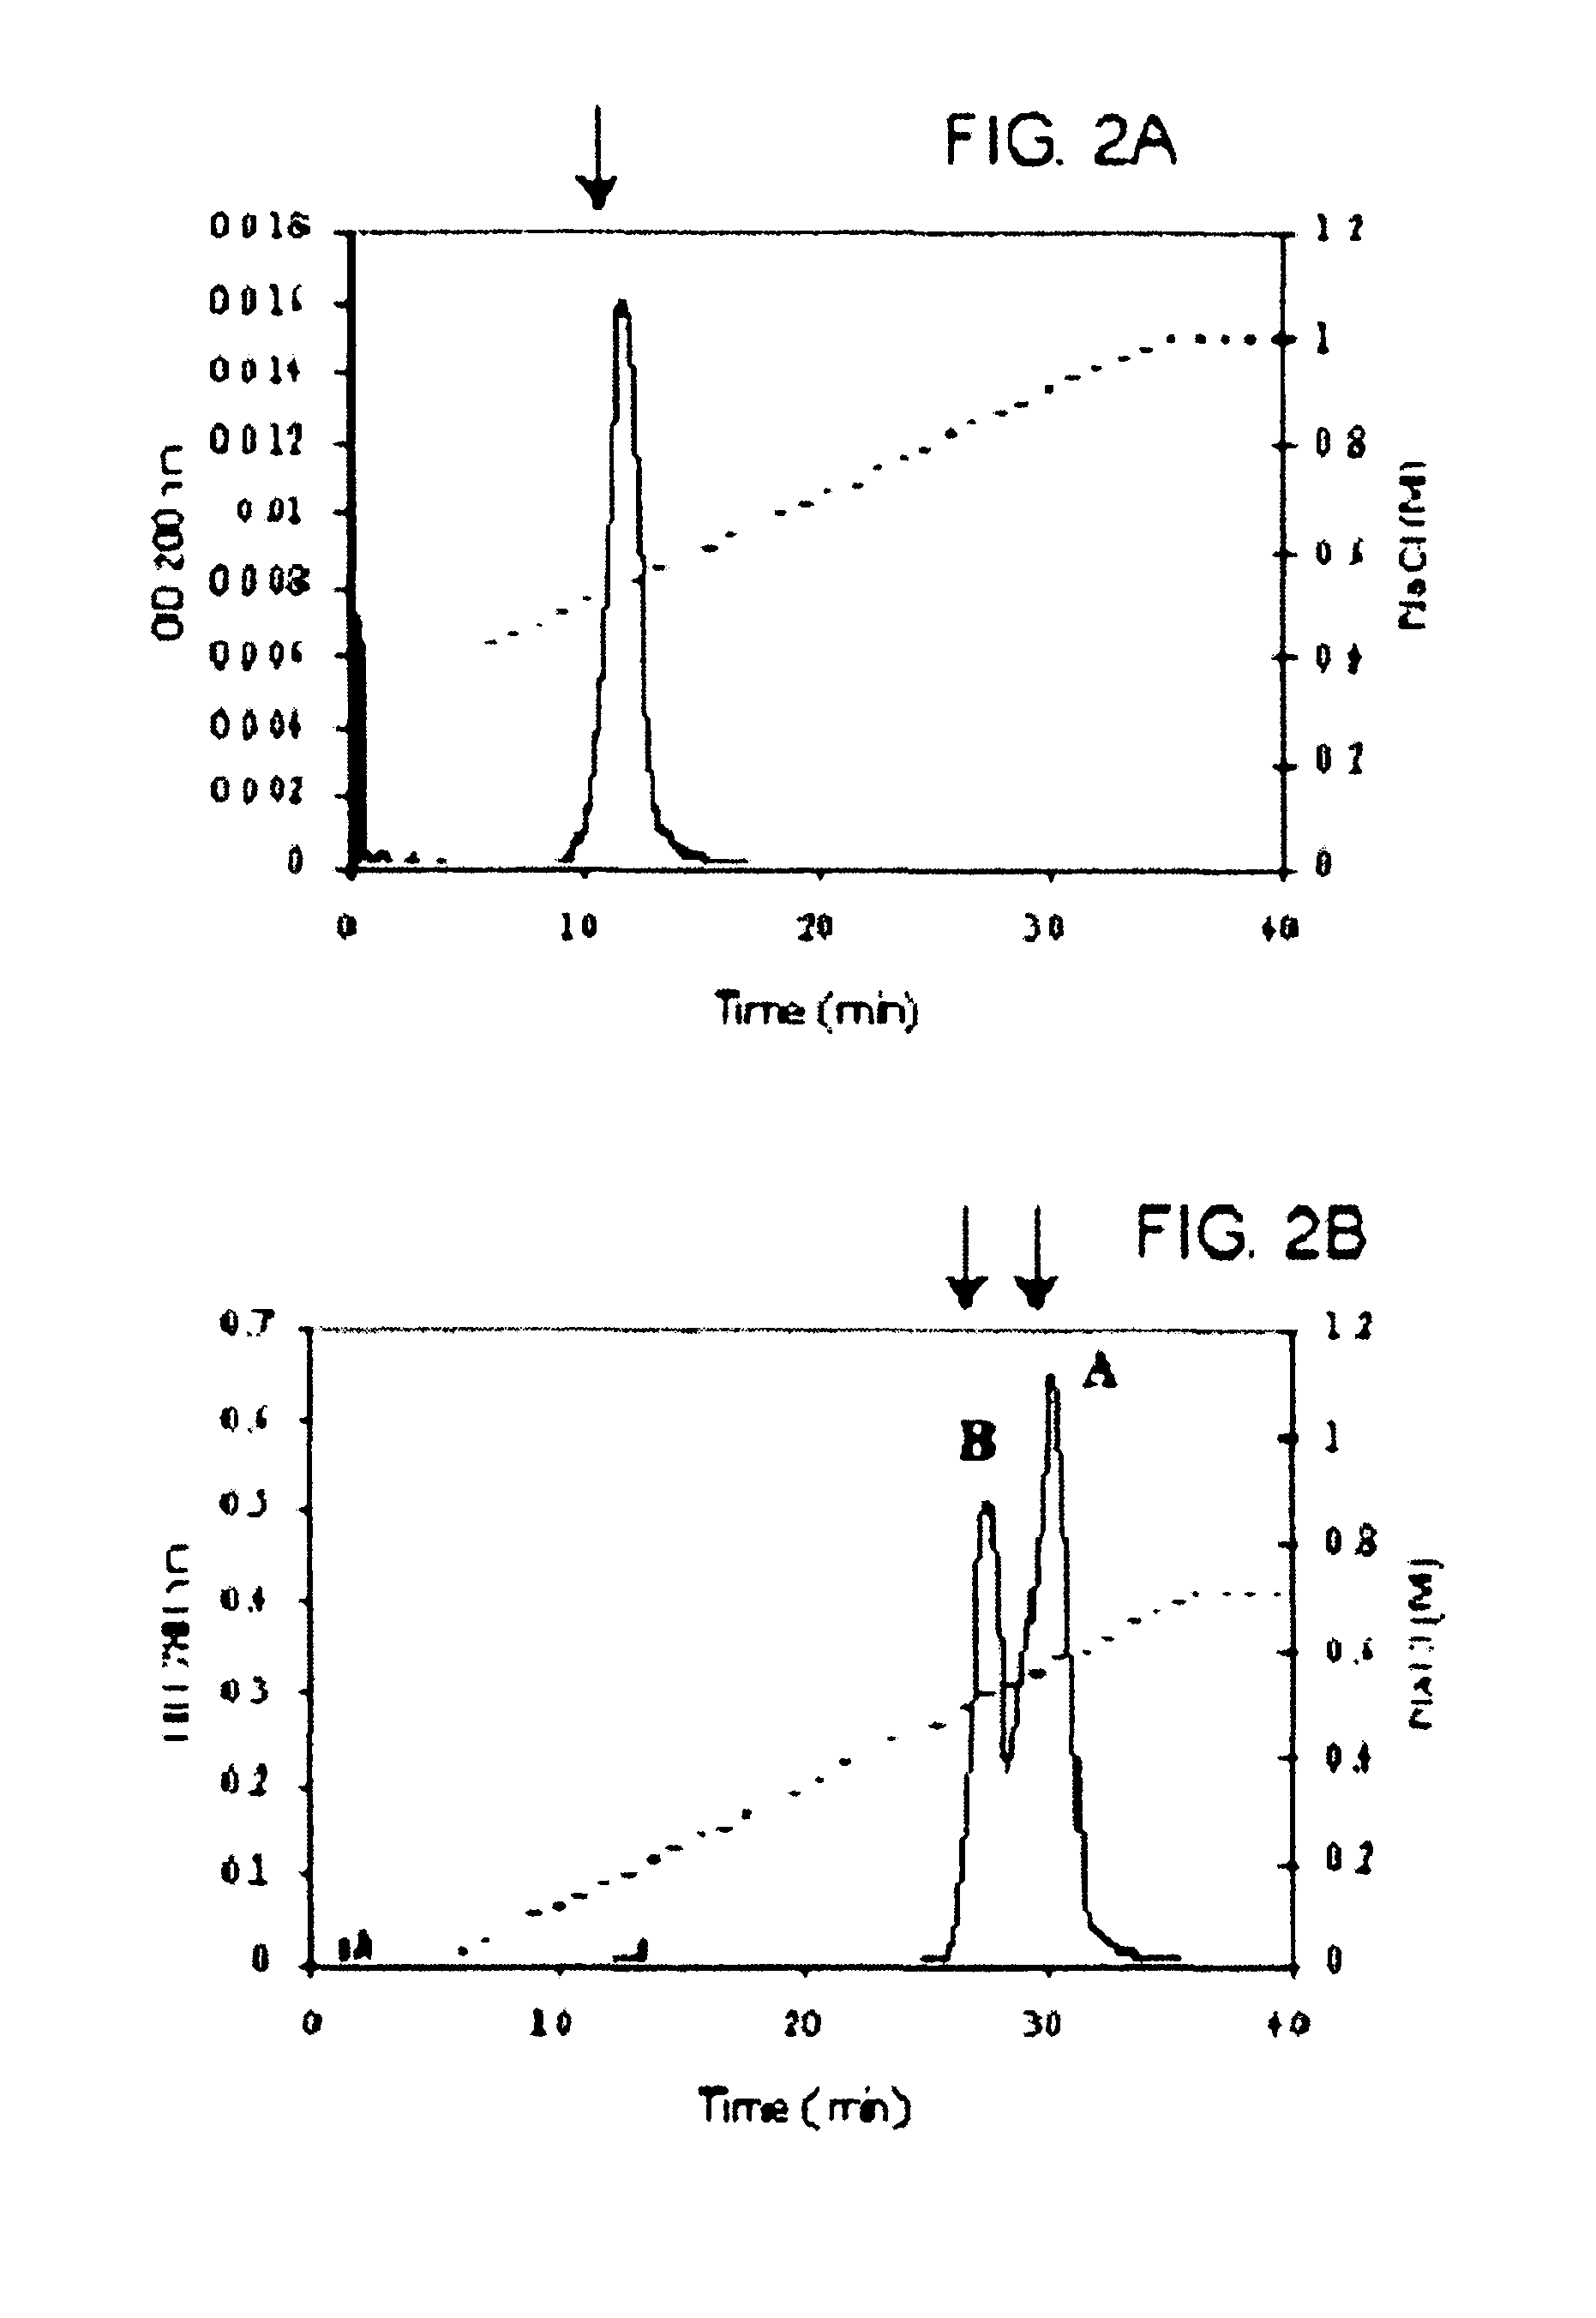 Product and composition containing a Concholepas concholepas hemocyanin (CCH) subunit, and a method of use thereof